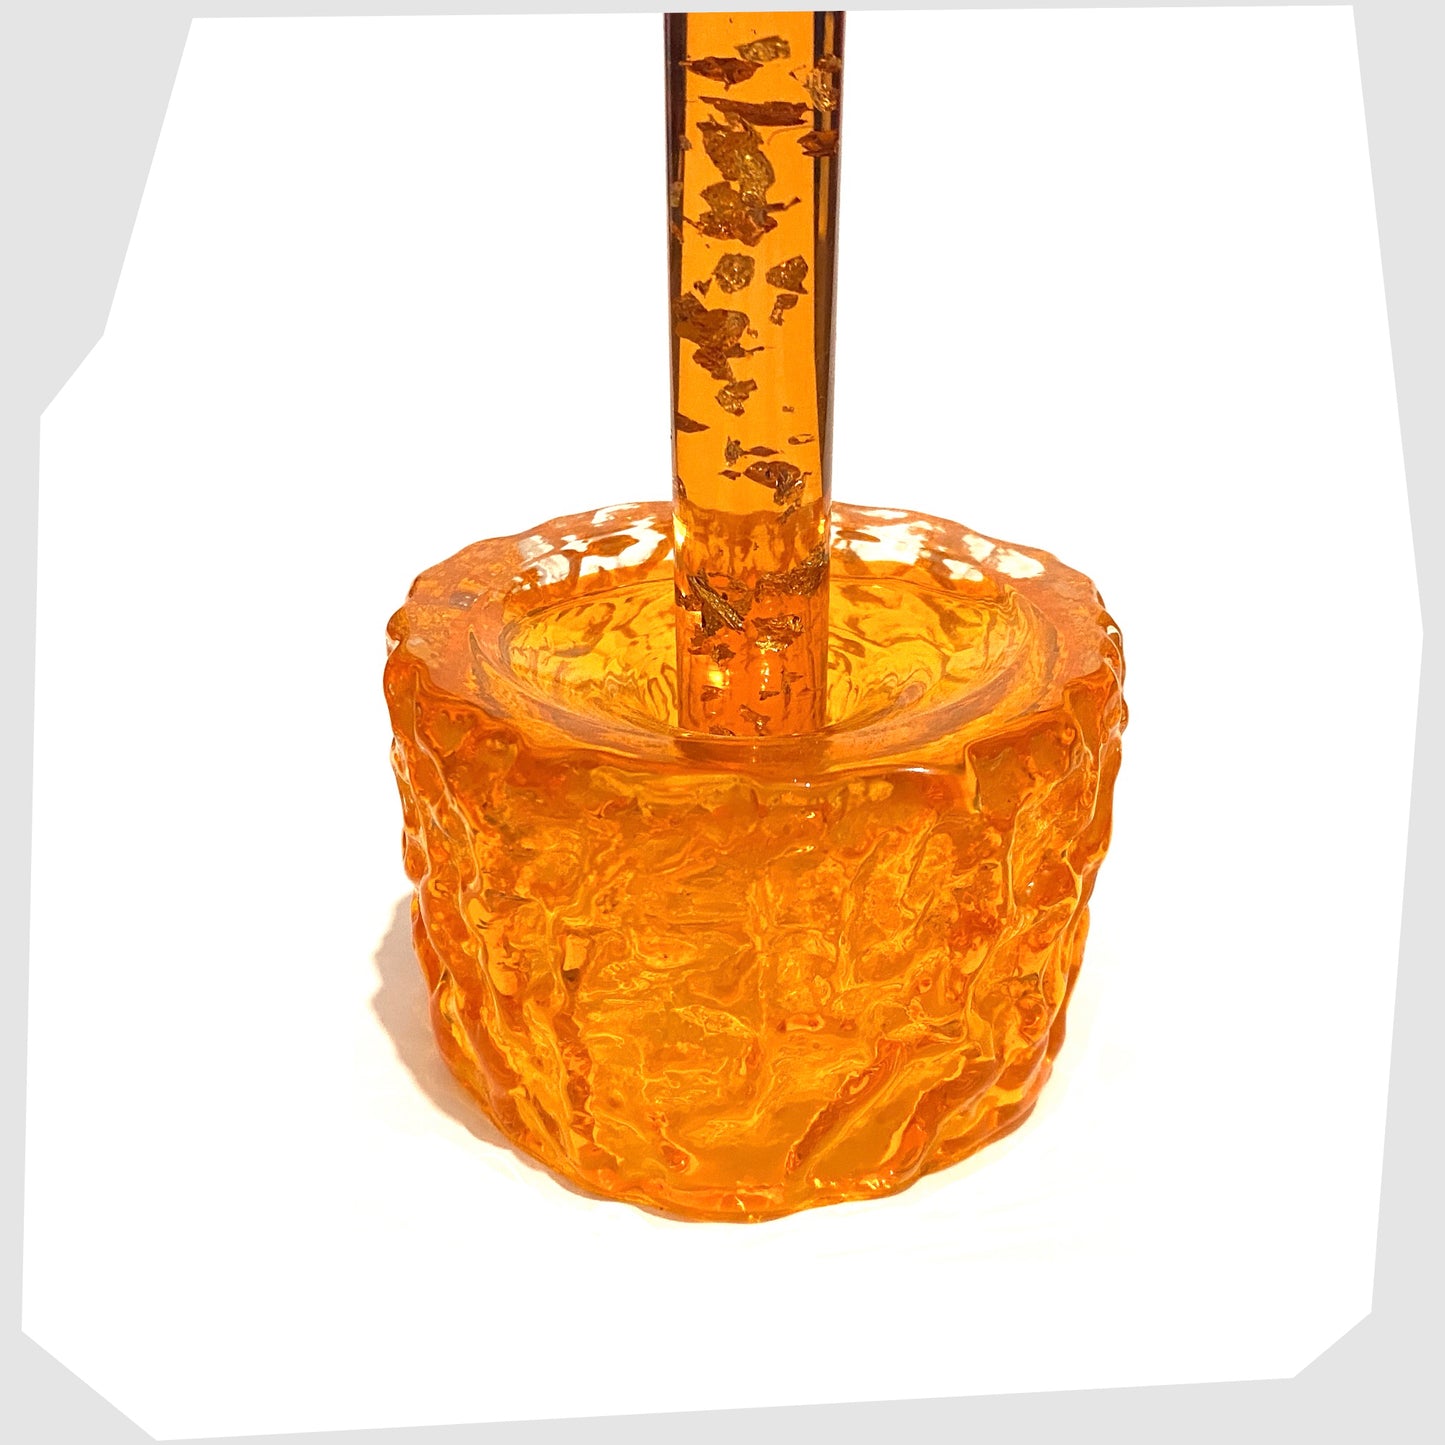 orange-bark-candlestick-by-whitefriars-glass